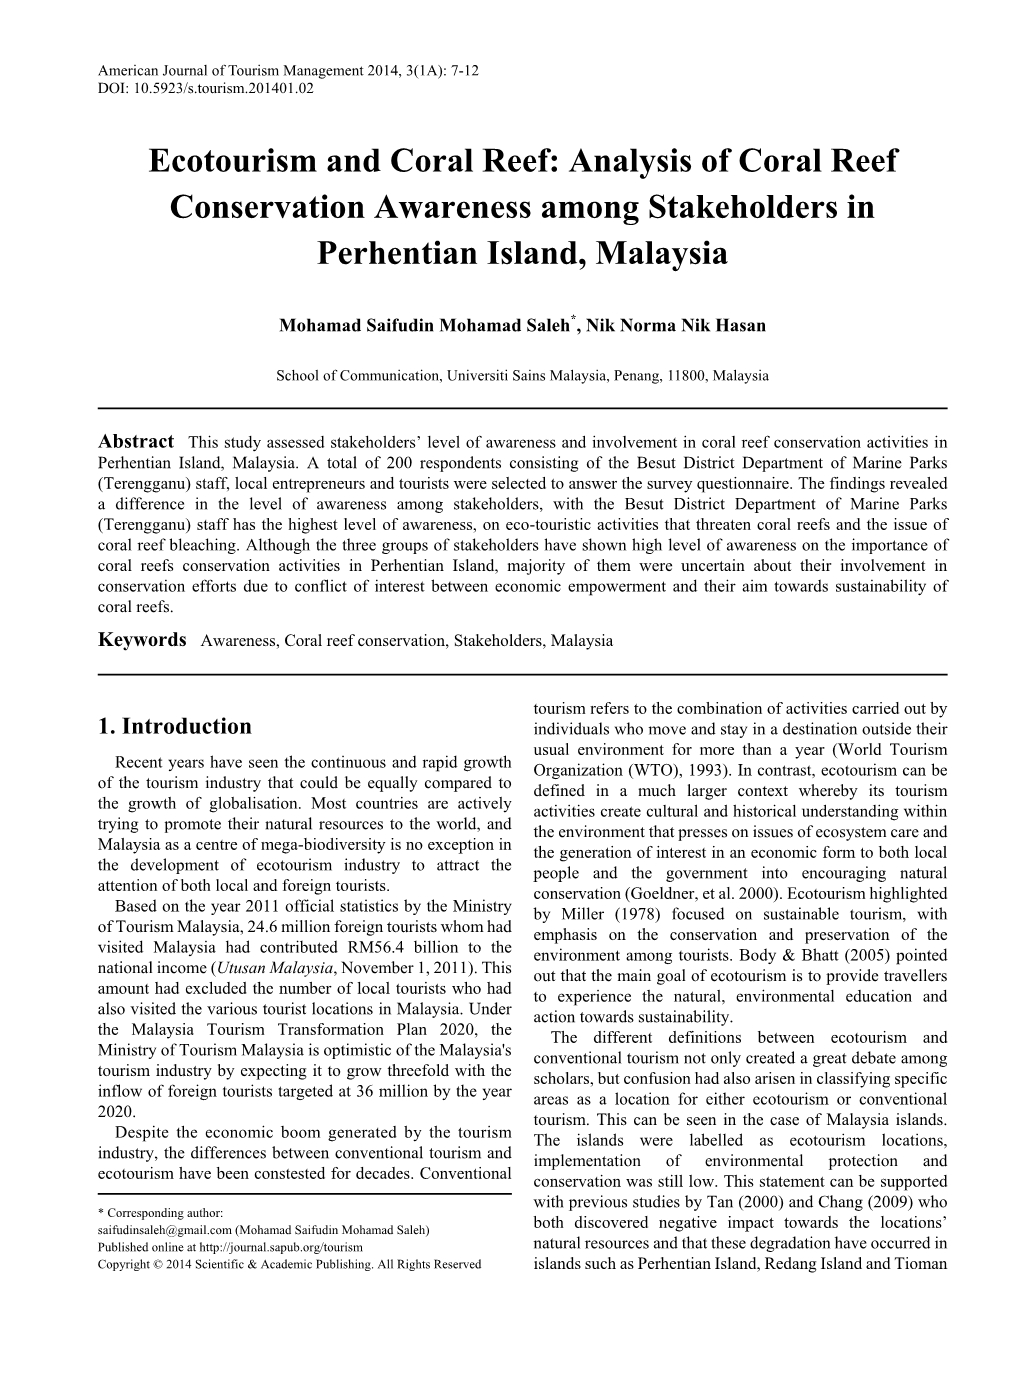 Ecotourism and Coral Reef: Analysis of Coral Reef Conservation Awareness Among Stakeholders in Perhentian Island, Malaysia